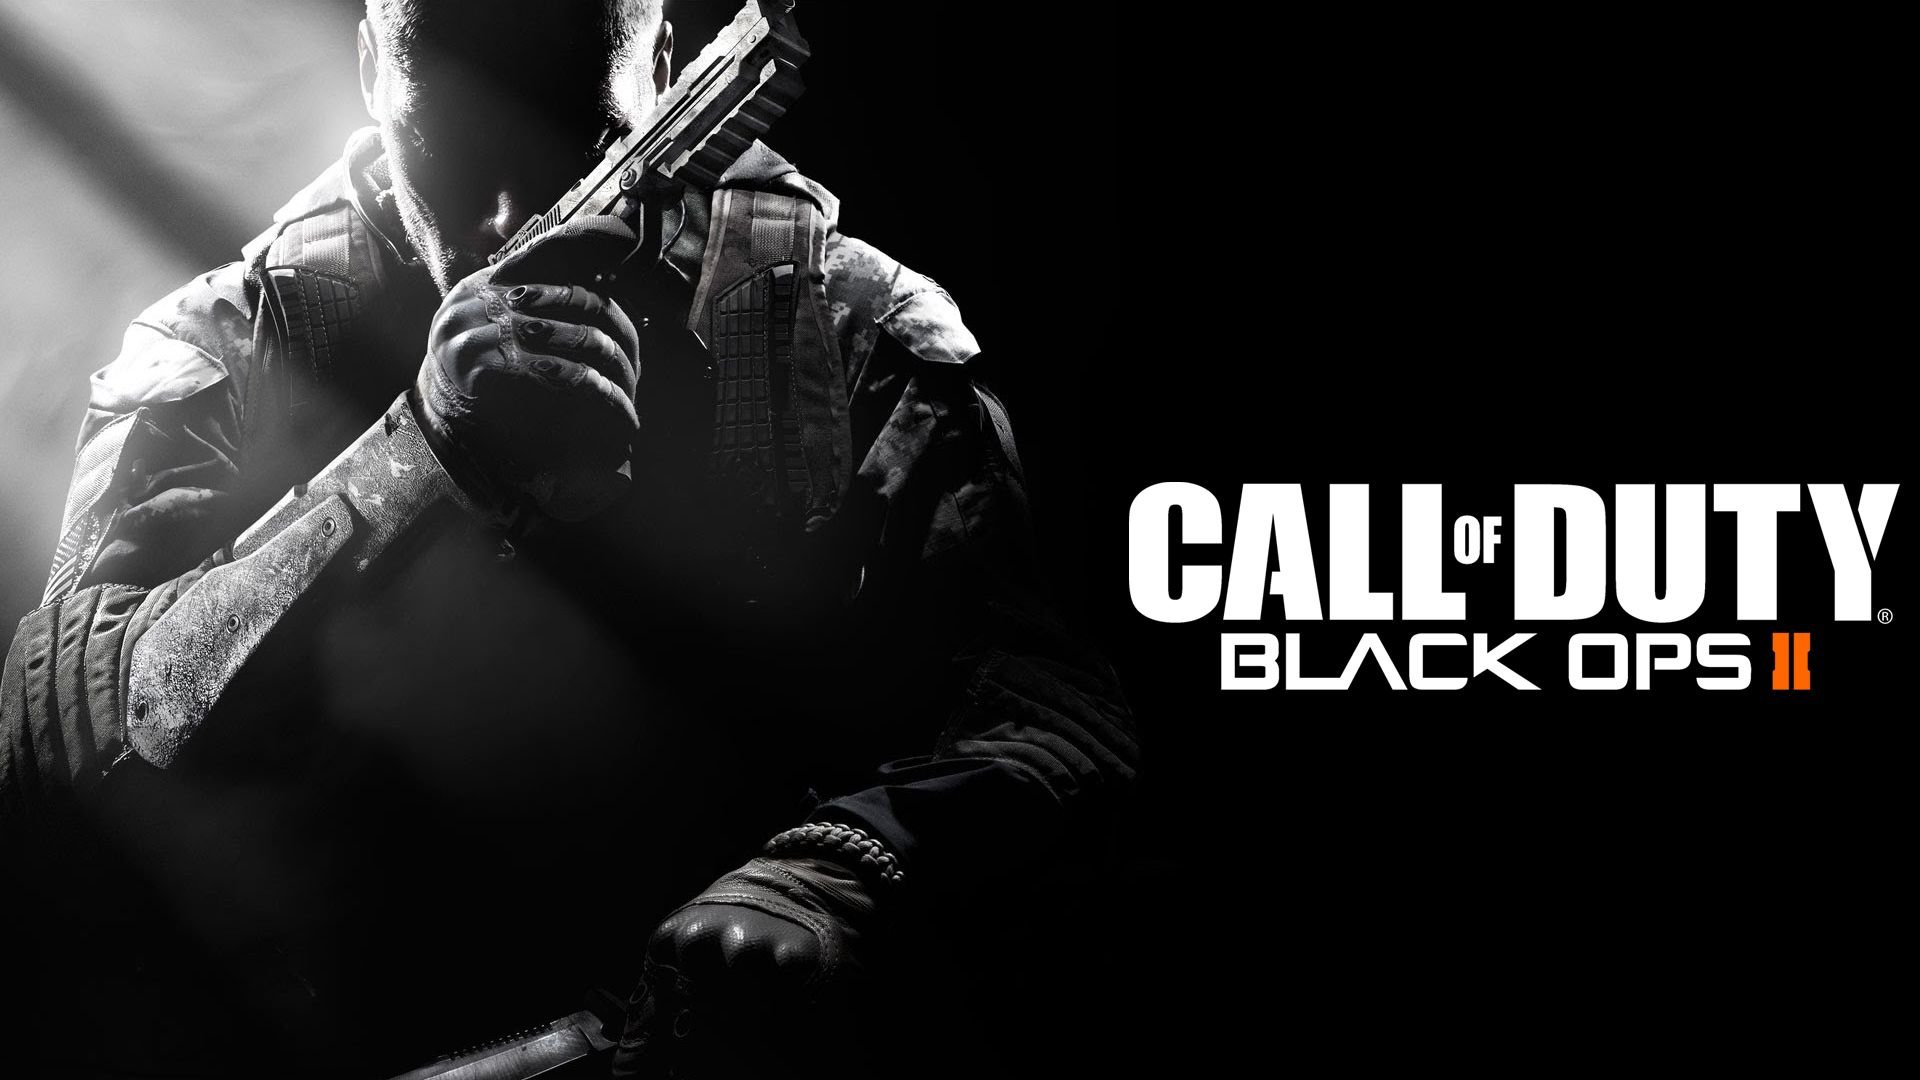 Call Of Duty Black Ops 2 wallpaper